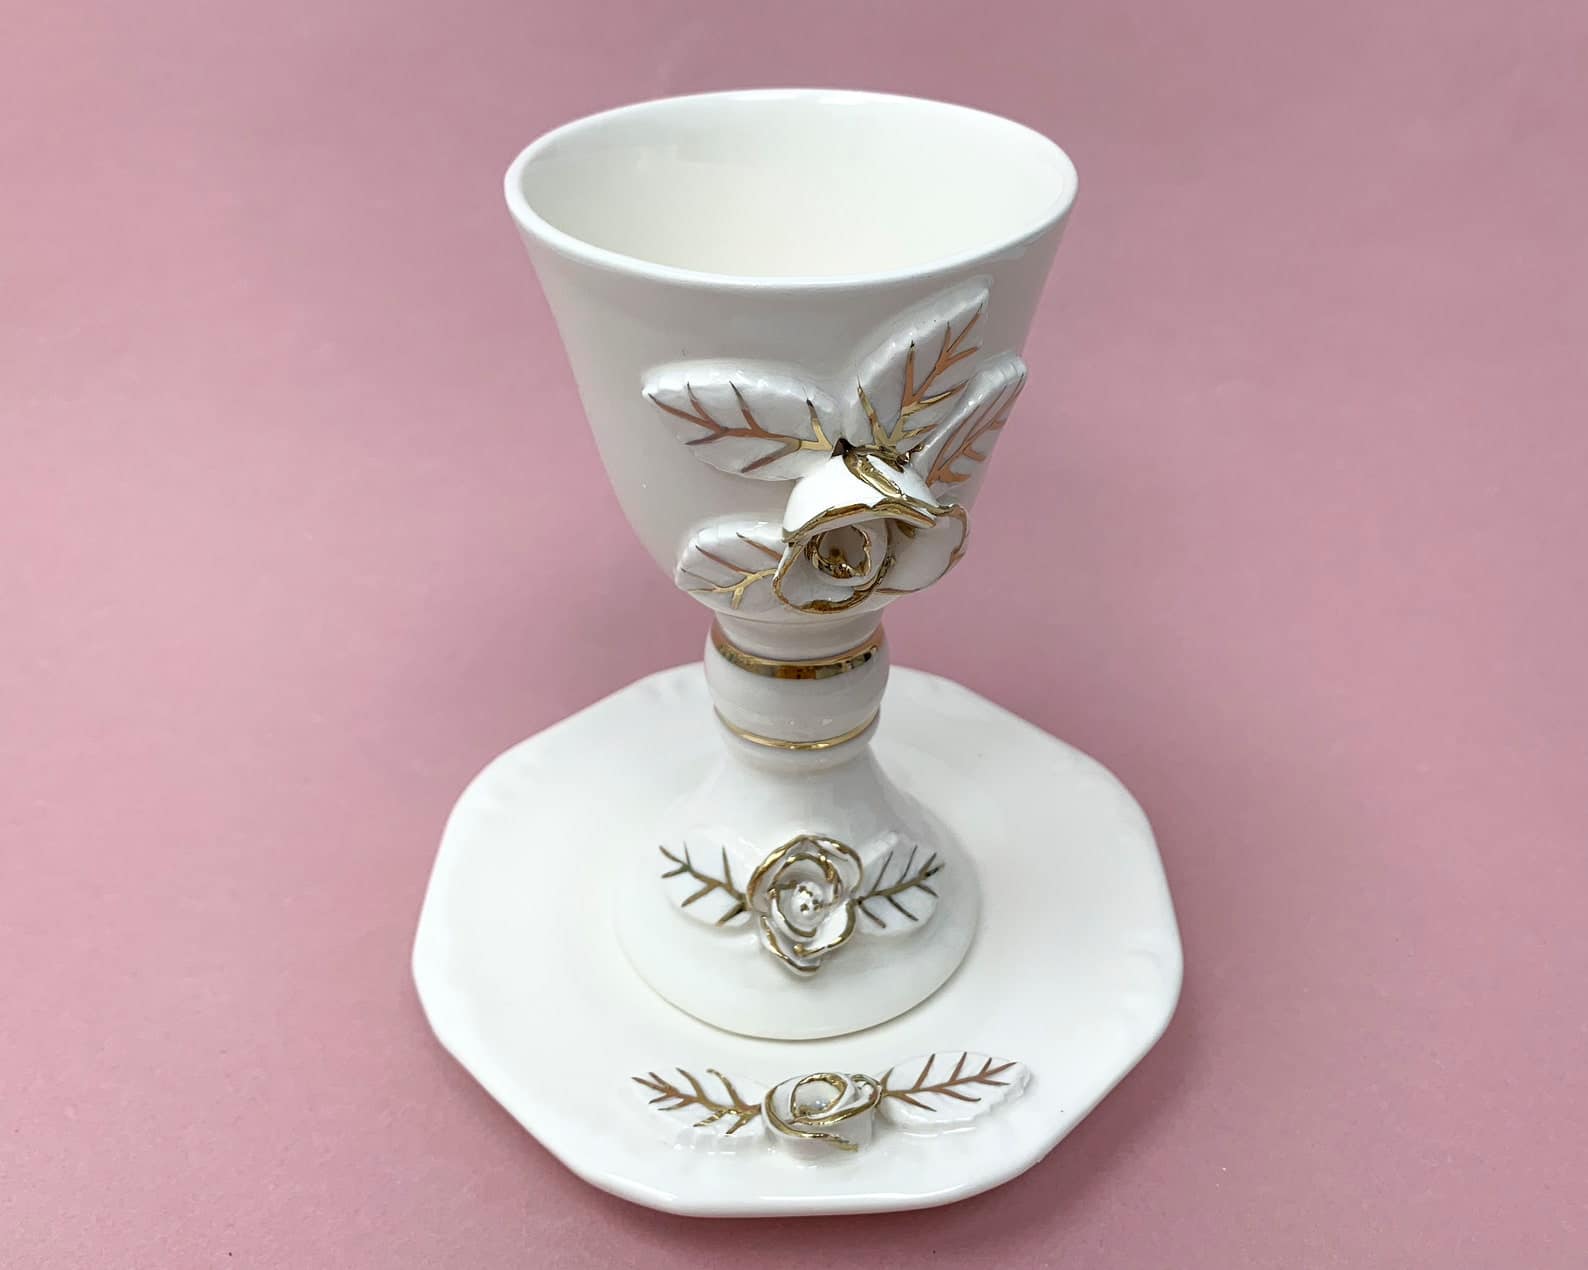 Ceramic Gold Painted Ceramic Cup and Plate Set